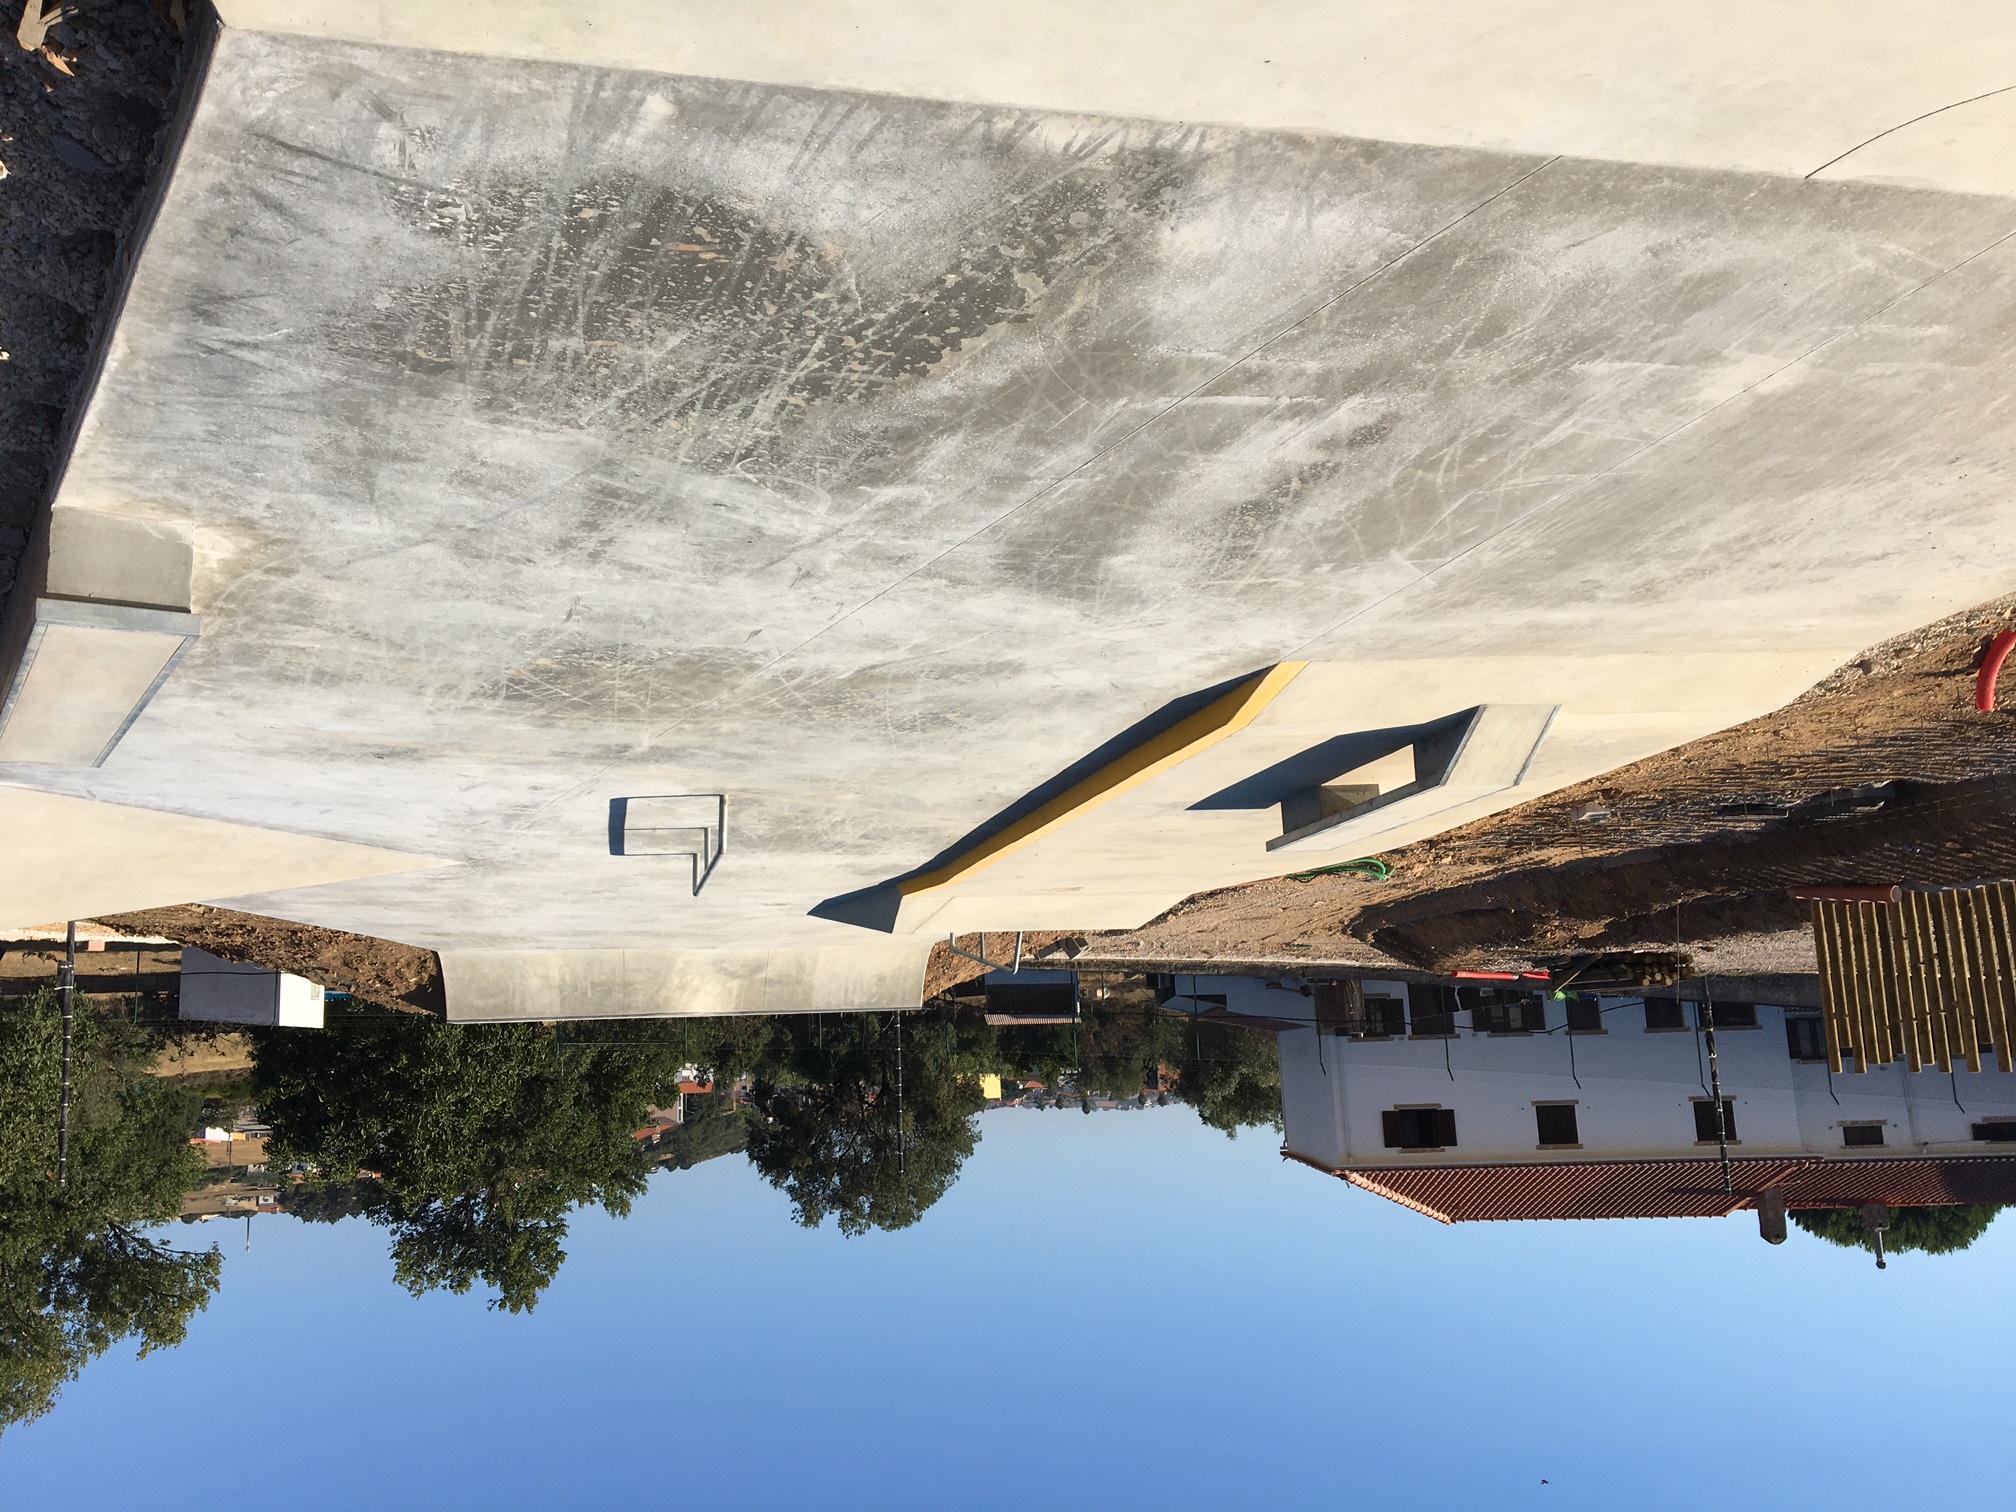 The New Milharado skatepark in Portugal is almost ready